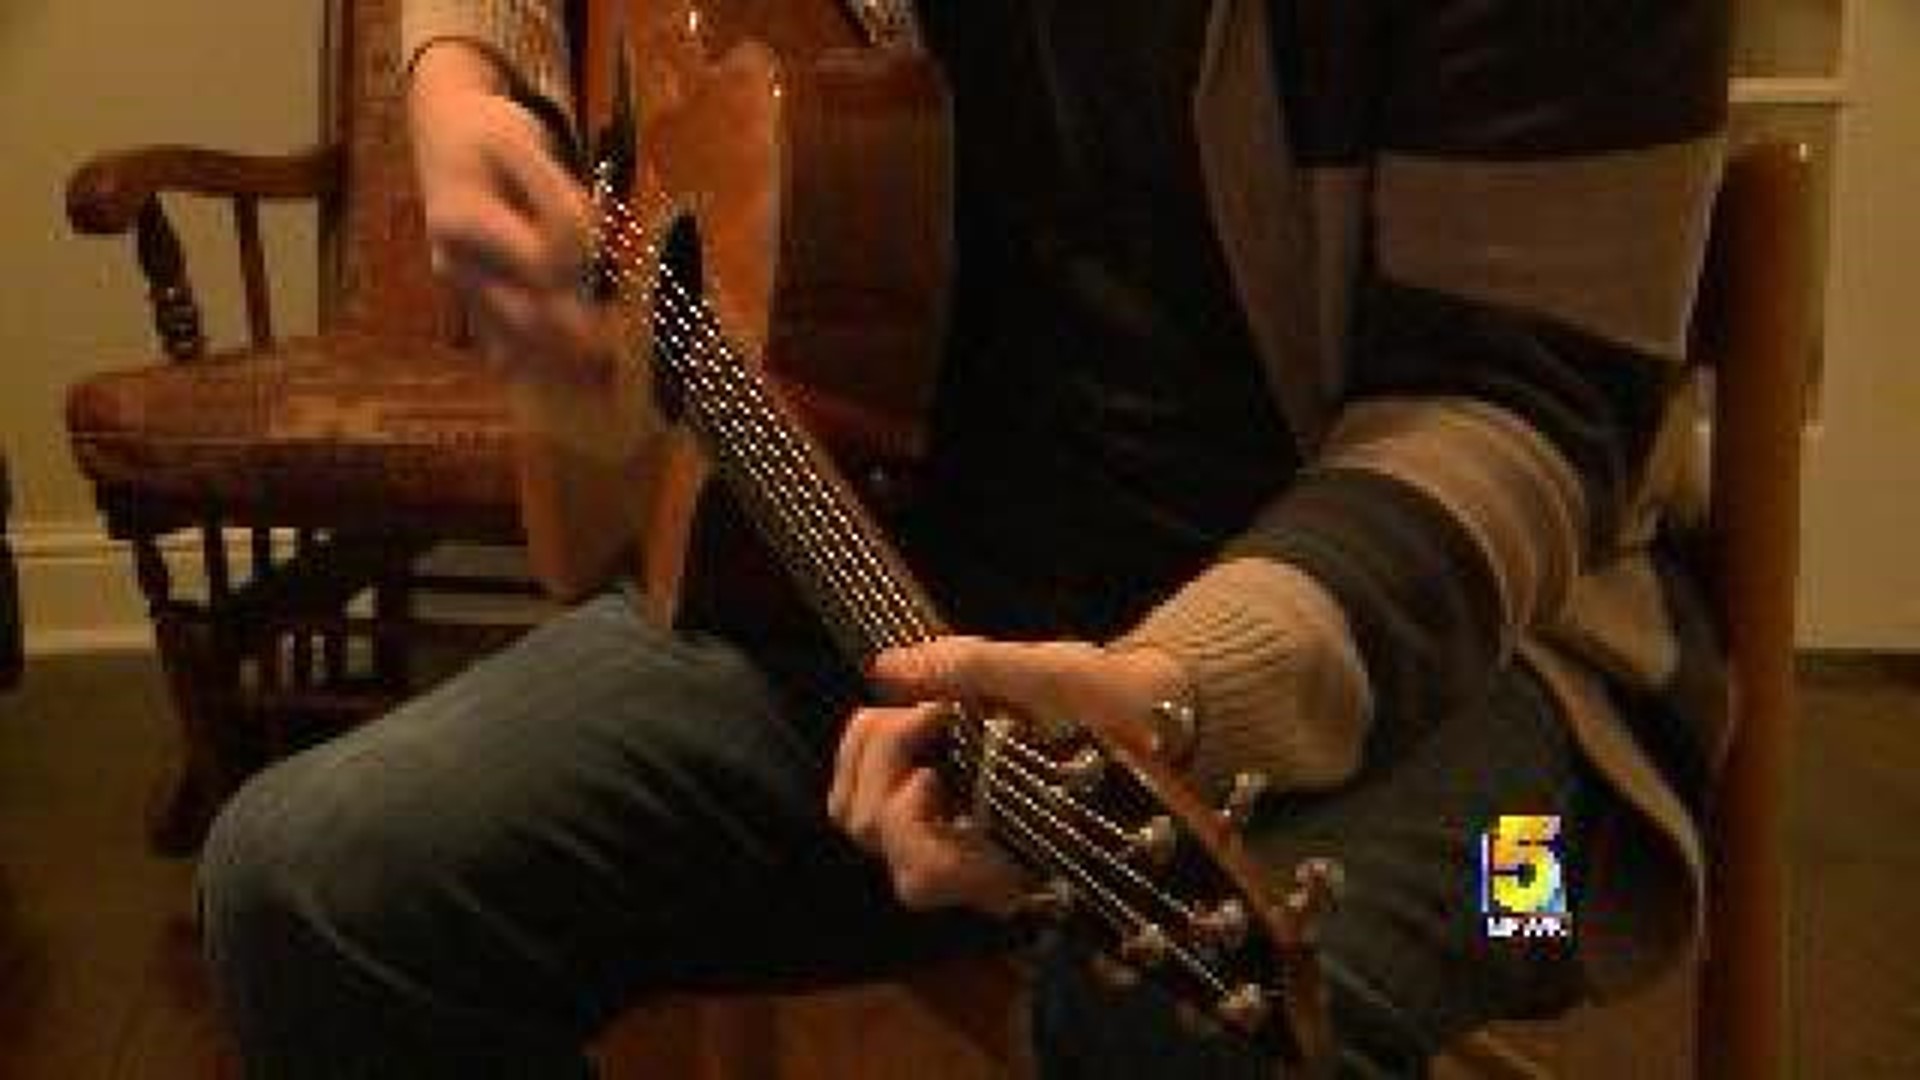 Local Musician Could Head To Grammy Awards